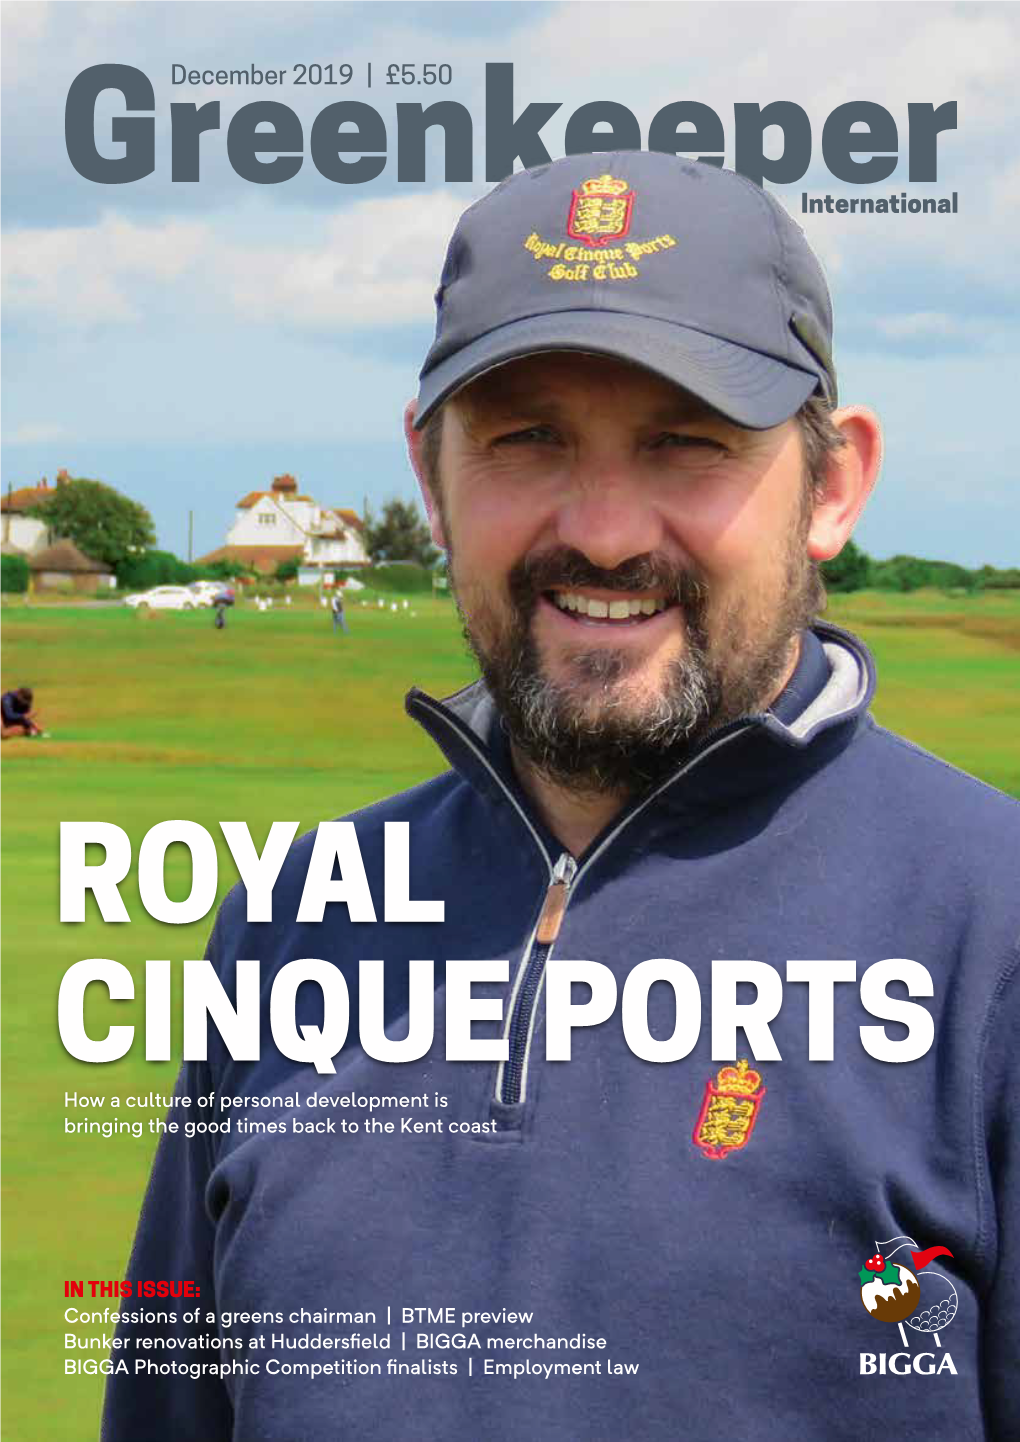 ROYAL CINQUE PORTS How a Culture of Personal Development Is Bringing the Good Times Back to the Kent Coast